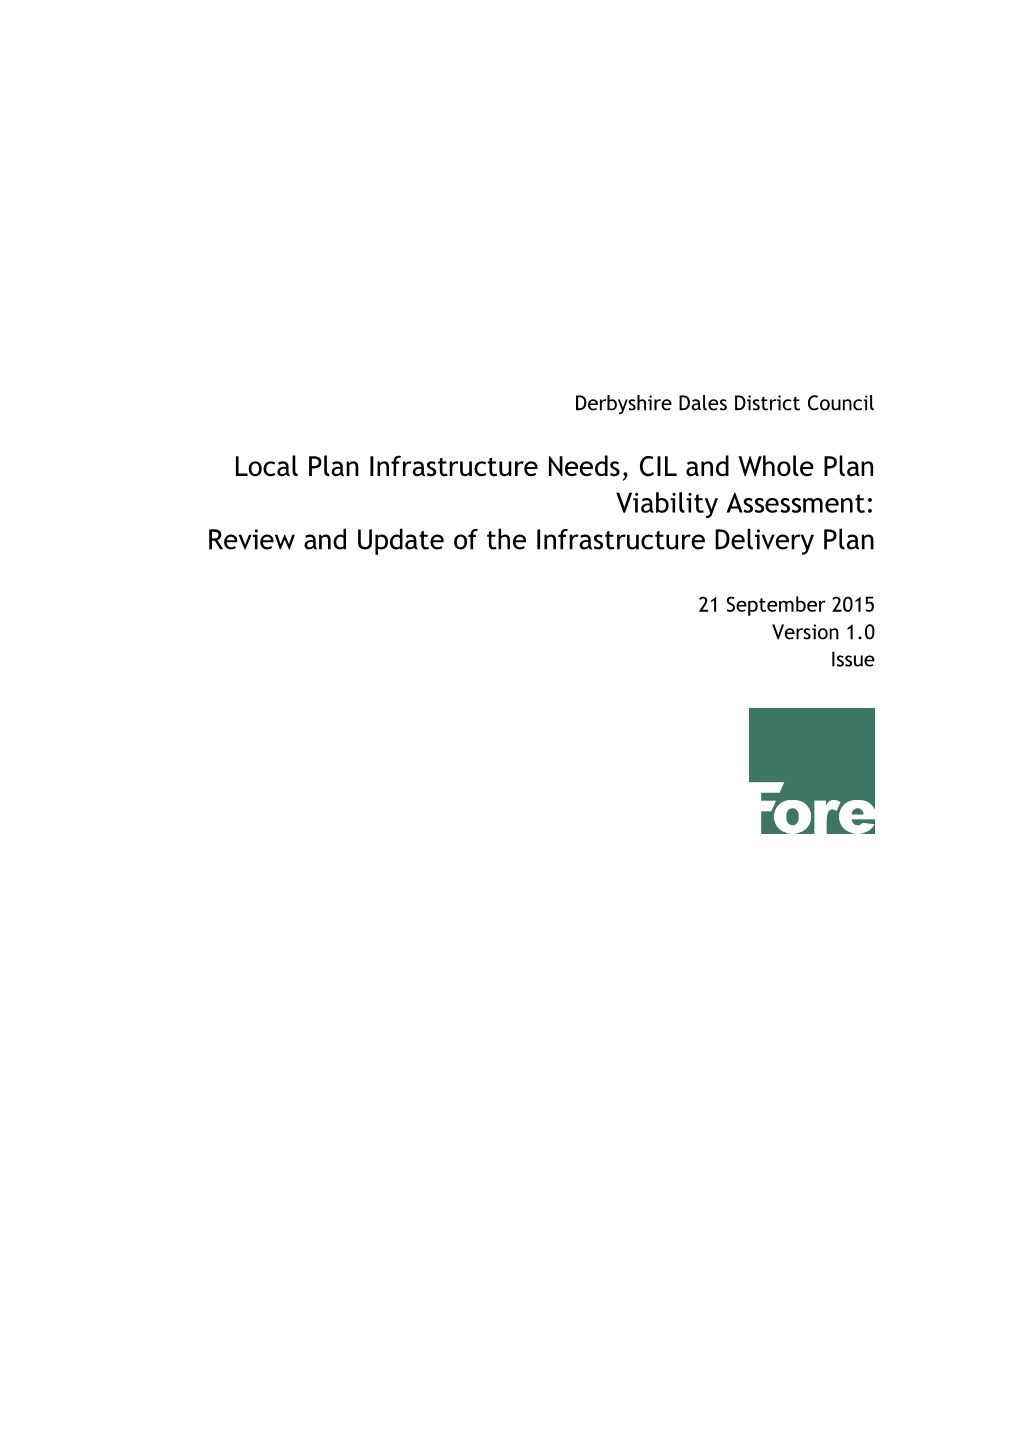 Local Plan Infrastructure Needs, CIL and Whole Plan Viability Assessment: Review and Update of the Infrastructure Delivery Plan